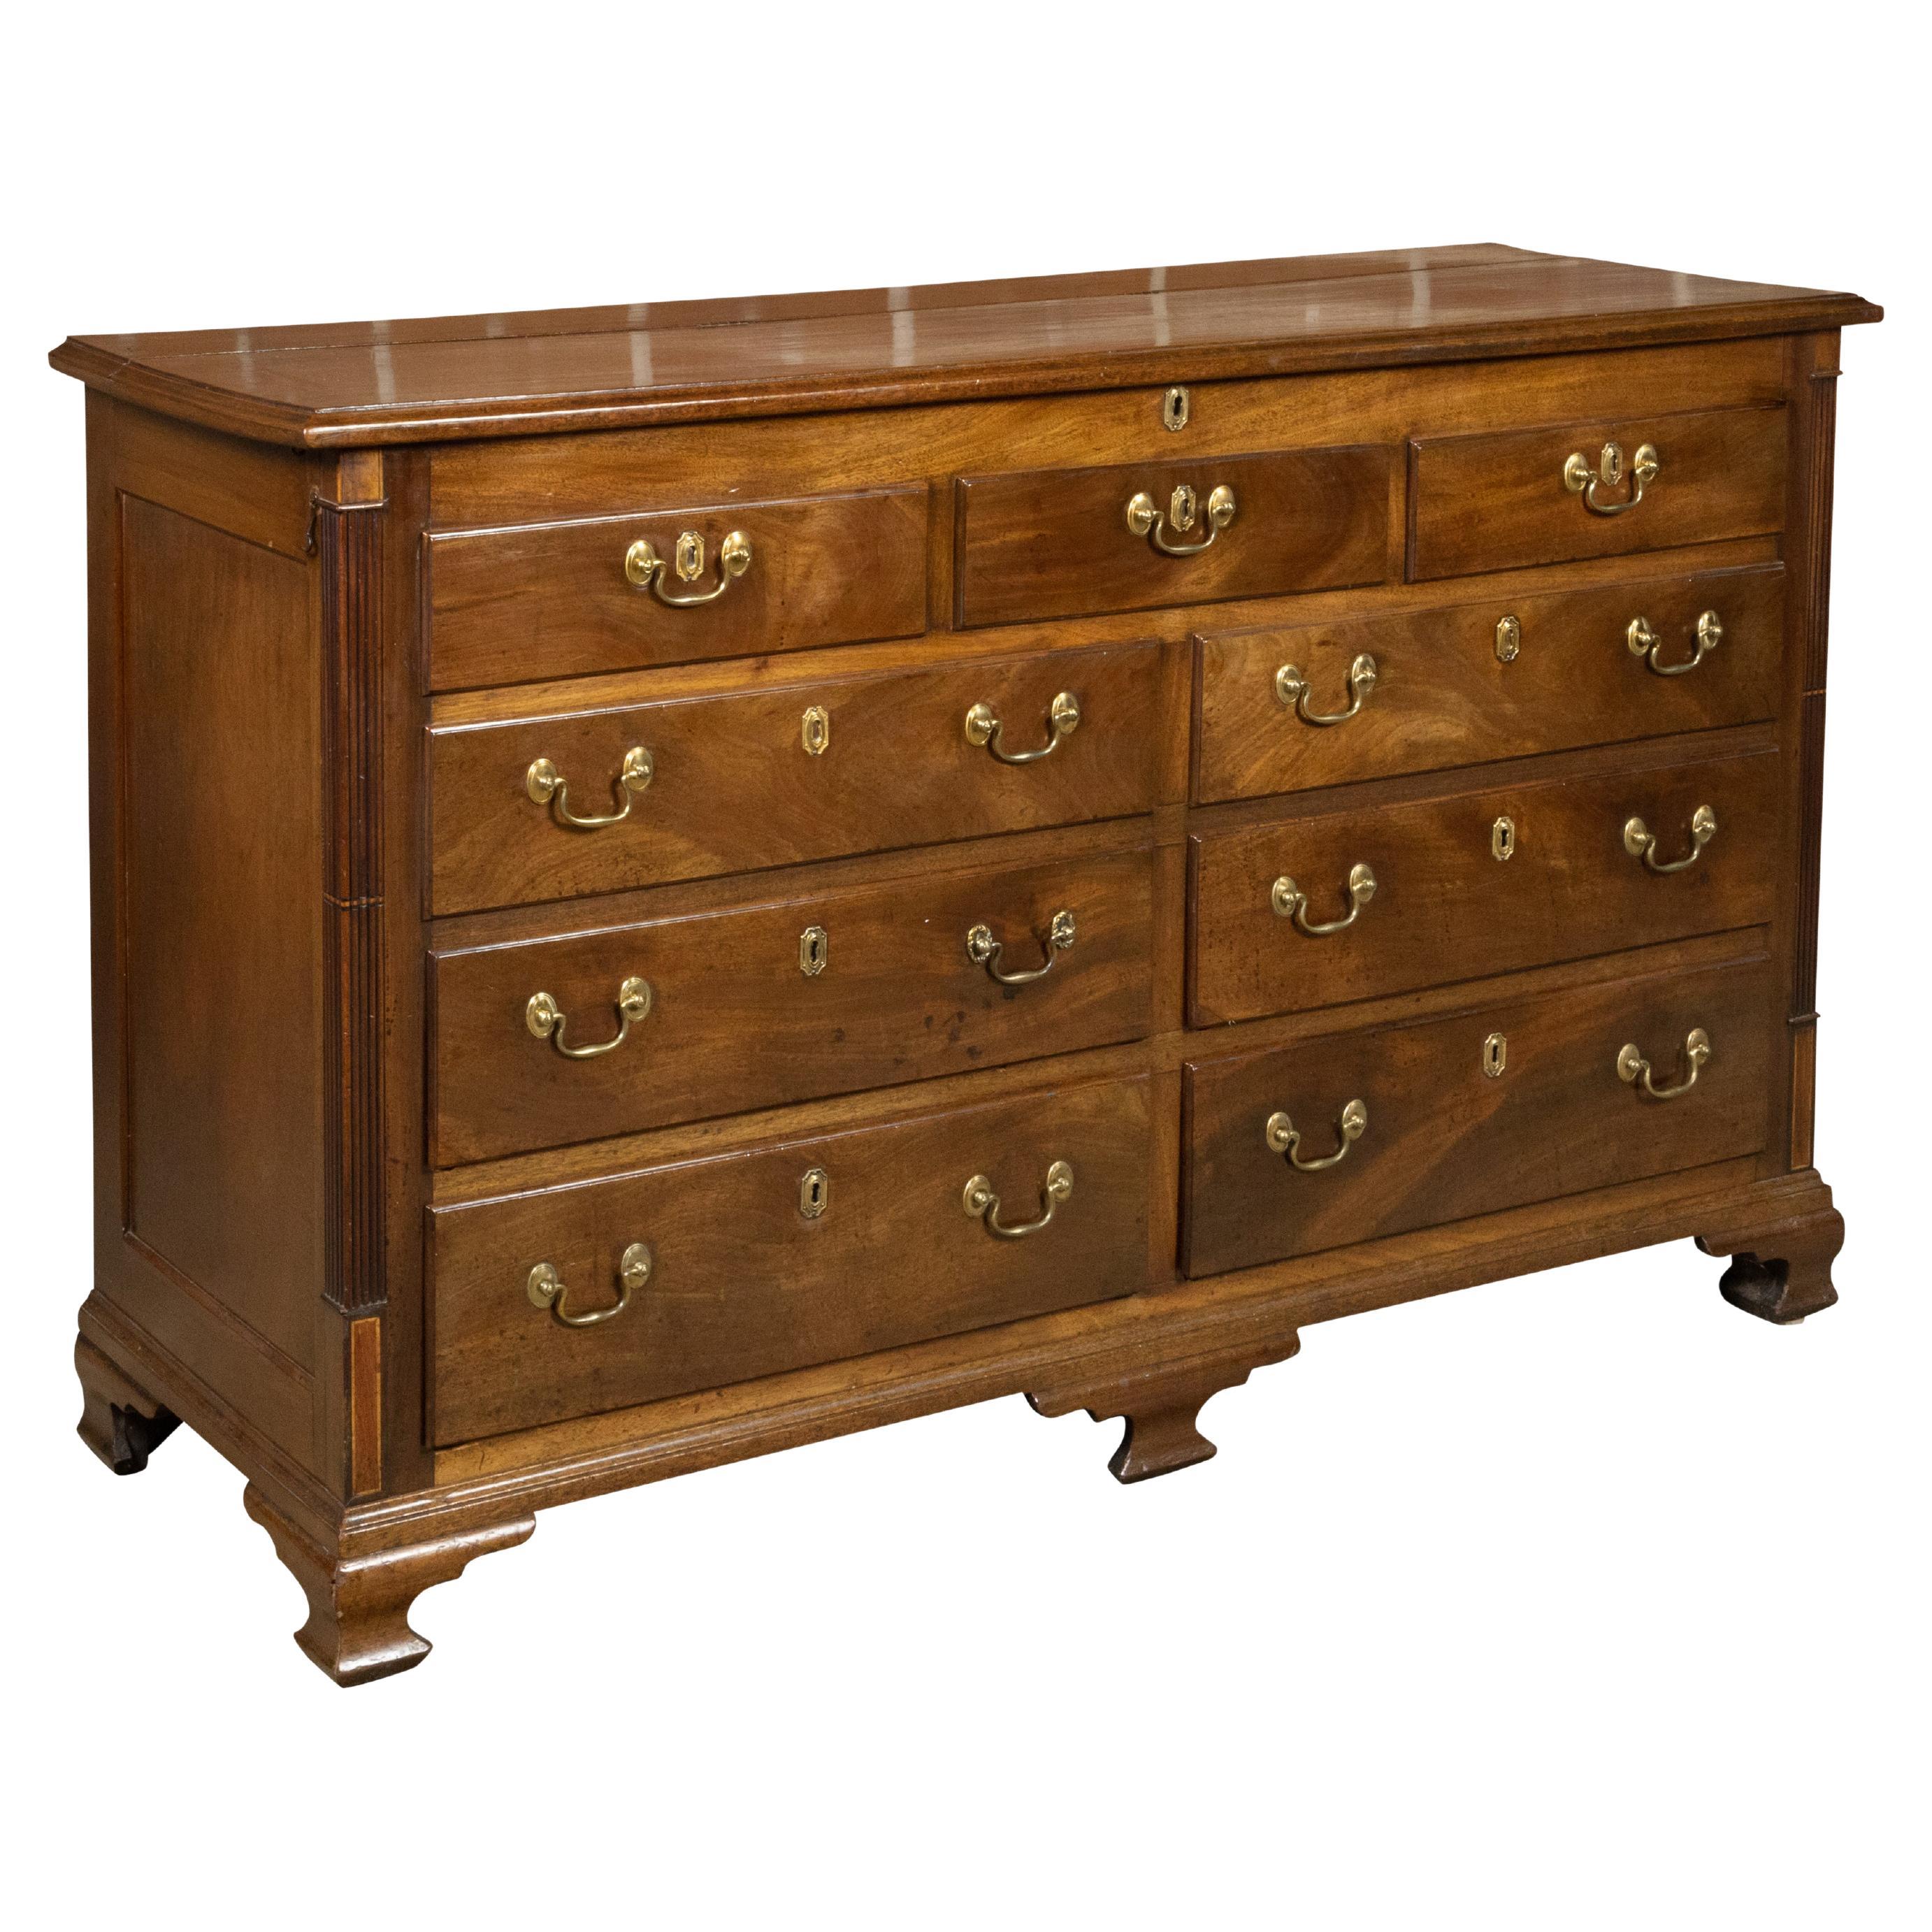 English Walnut 19th Century Flip Top Sideboard with Drawers and Brass Hardware